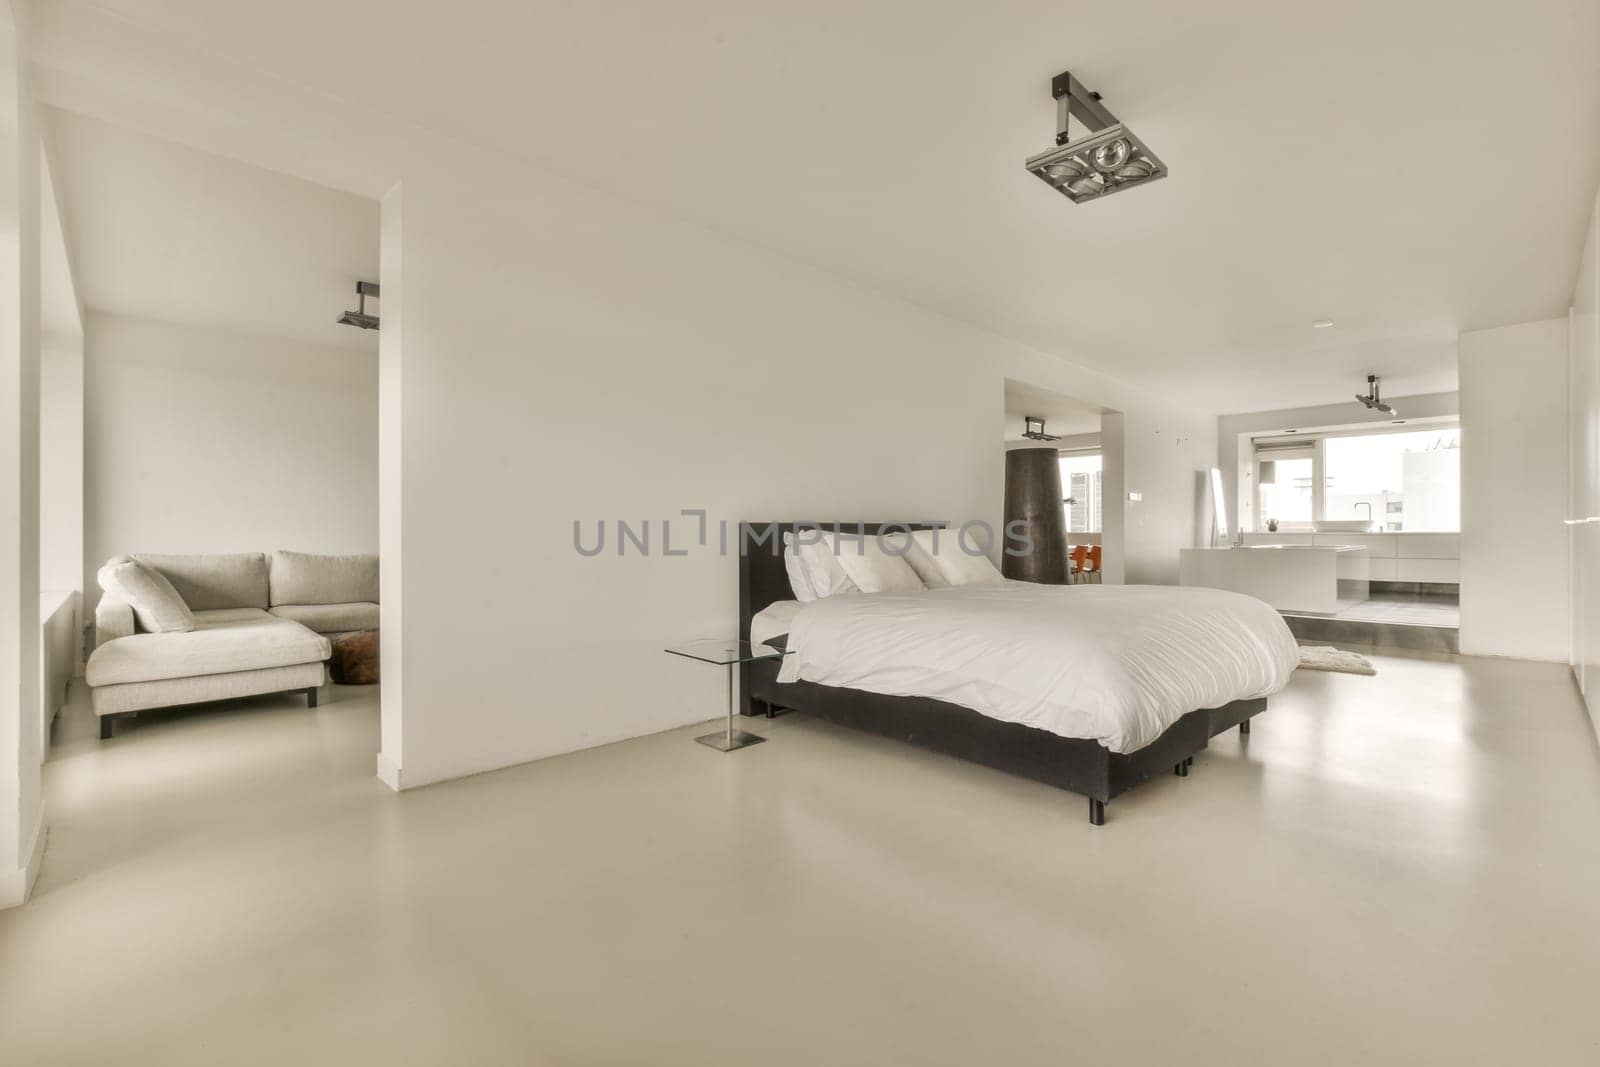 a modern bedroom with white walls and light gray flooring the room is well lit, but there is no one in sight